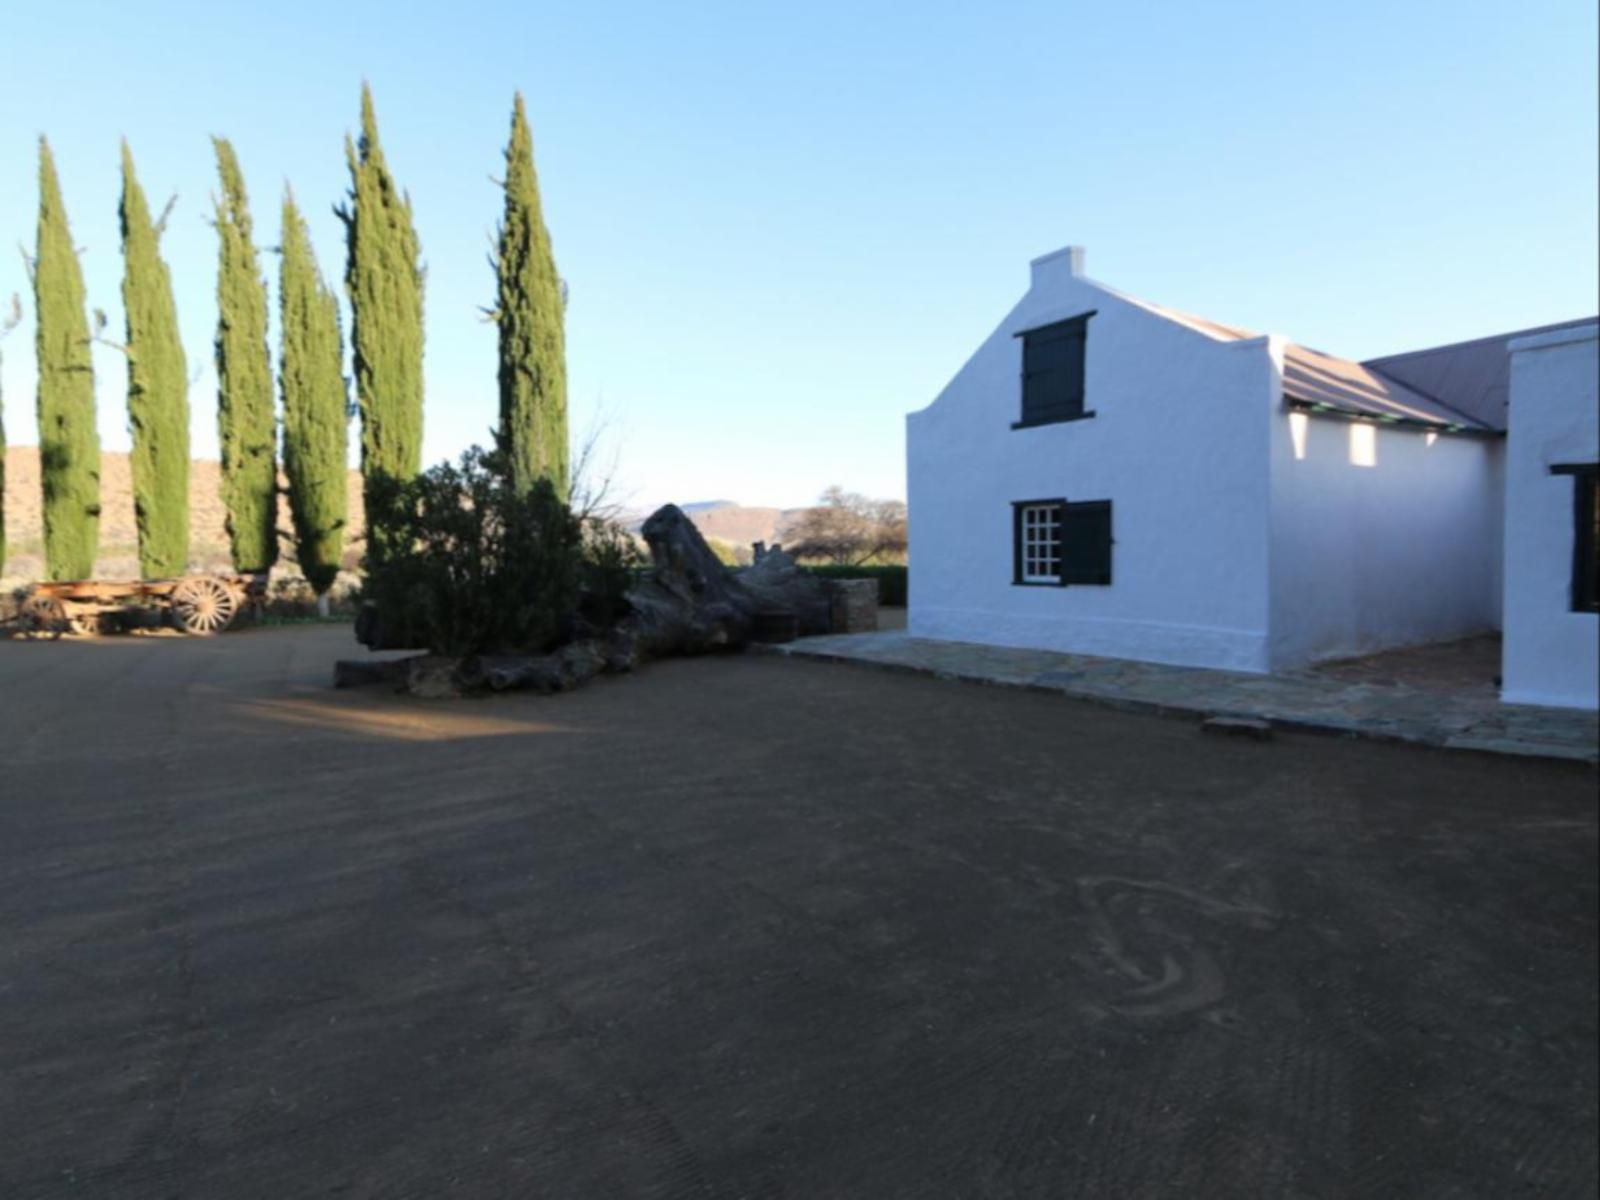 Letskraal Farm Accommodation Graaff Reinet Eastern Cape South Africa House, Building, Architecture